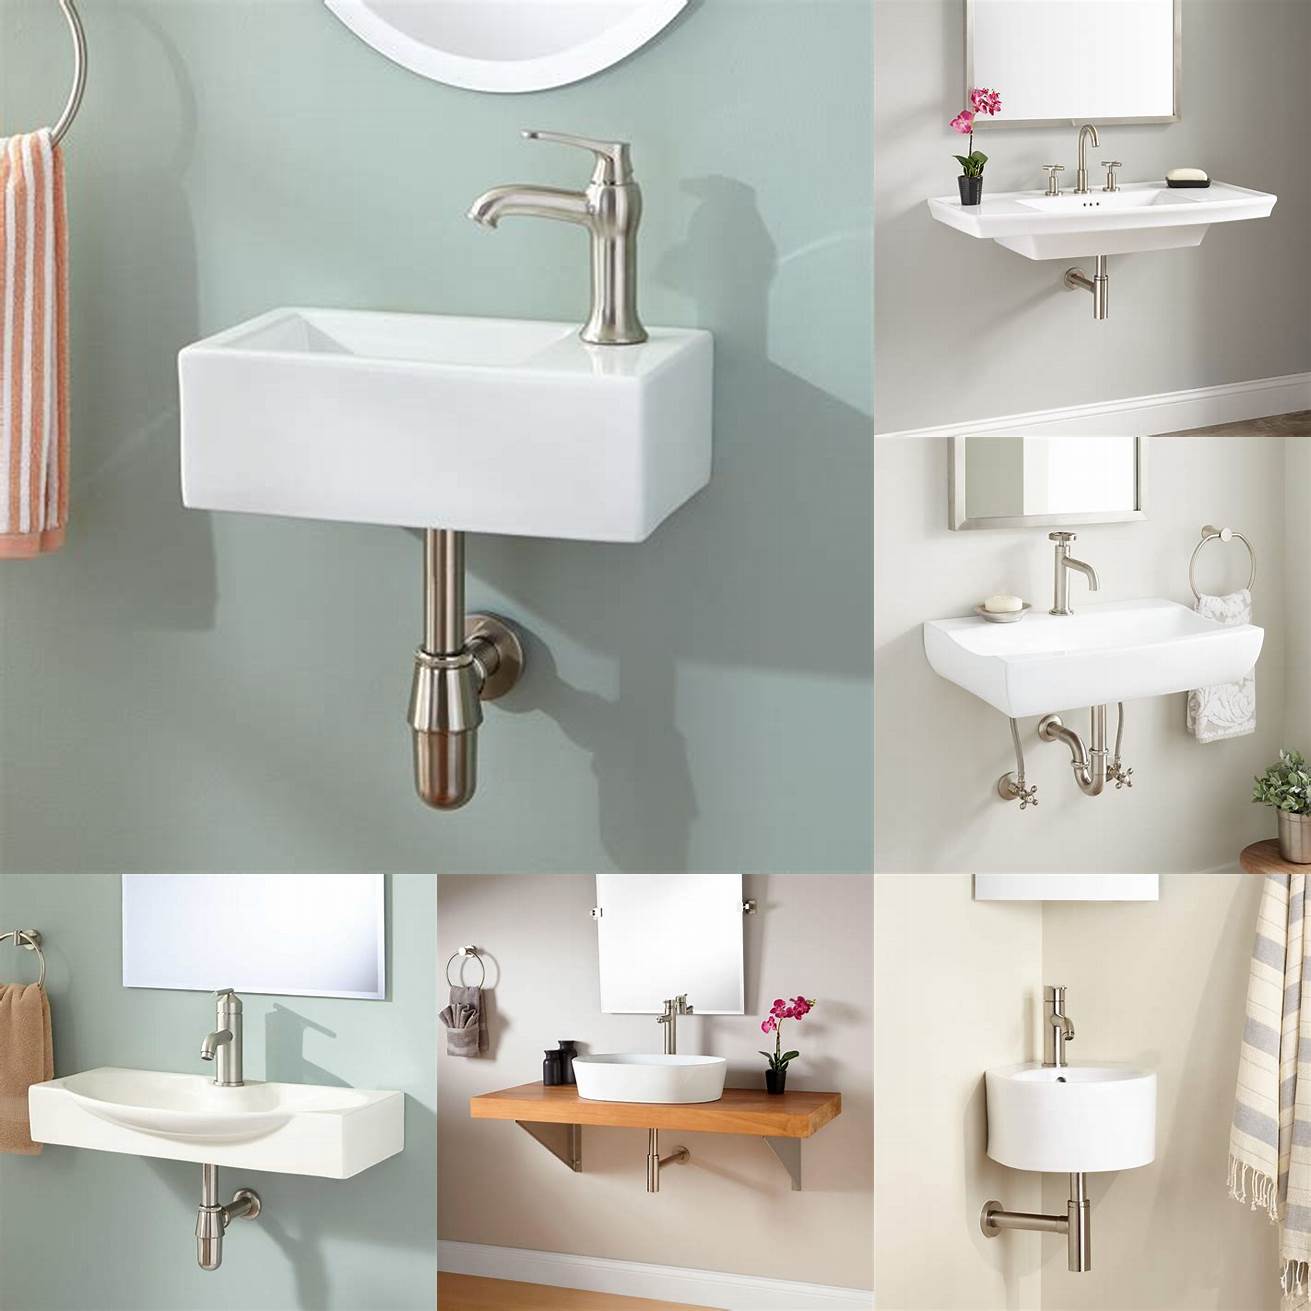 Wall-mounted sinks are attached to the wall freeing up floor space and making your bathroom look bigger They are easy to clean and maintain and come in different shapes and sizes However they dont provide storage space